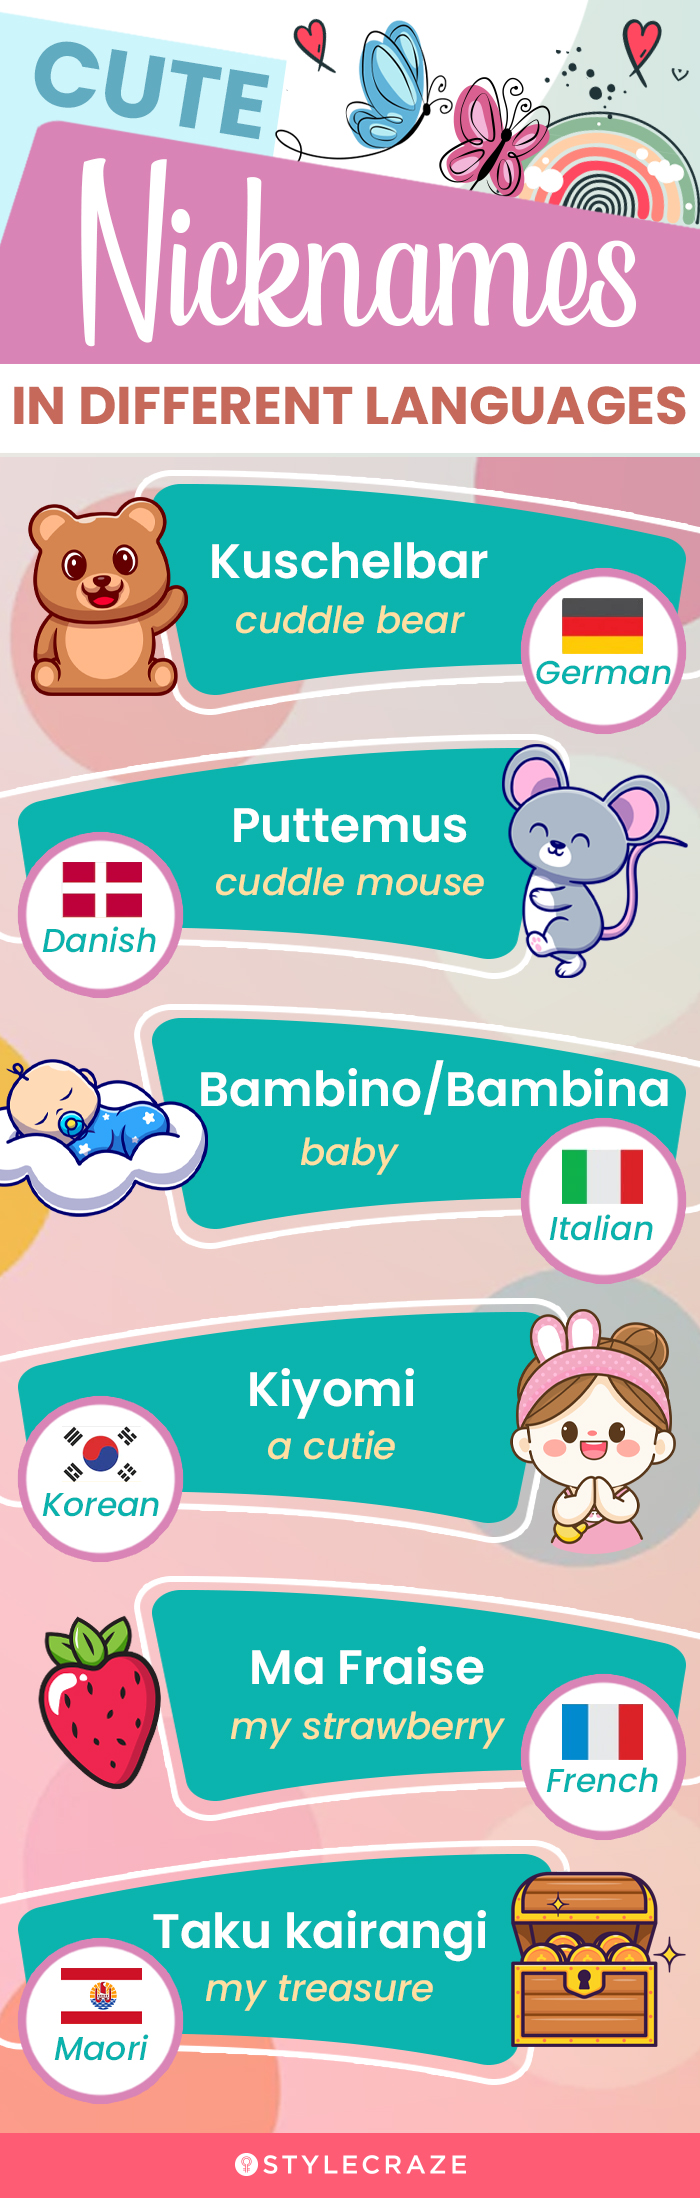 cute nicknames in different languages (infographic)